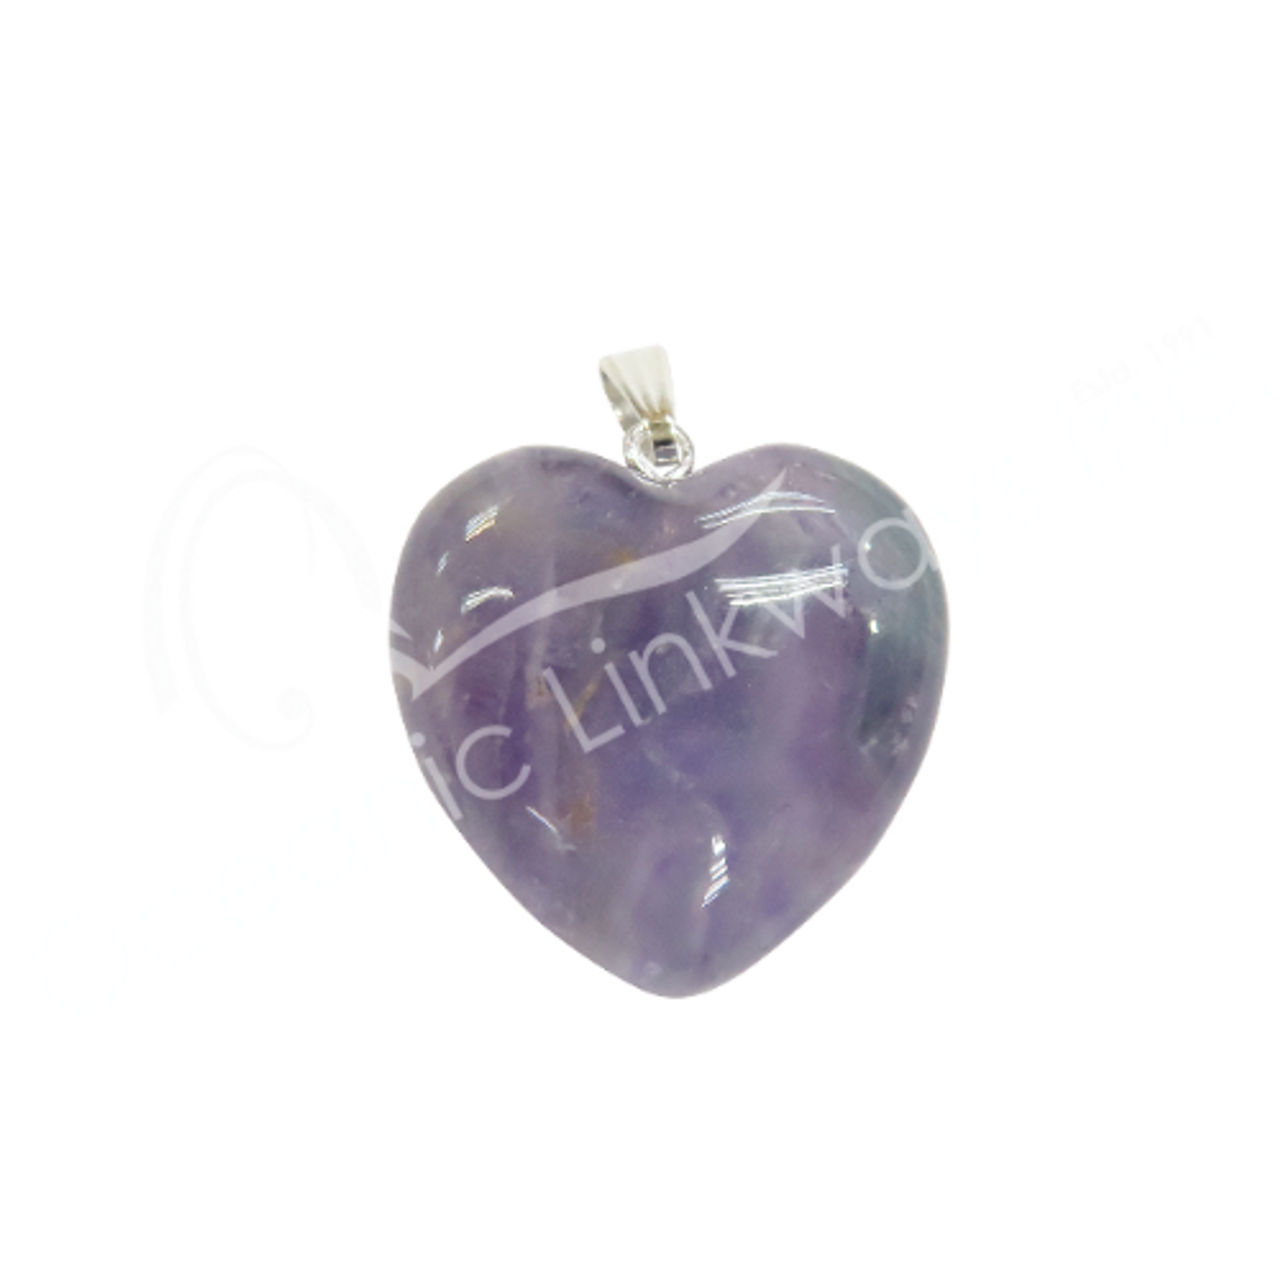 Gemstone Heart Pendant w/ Bail and Chain 25mm